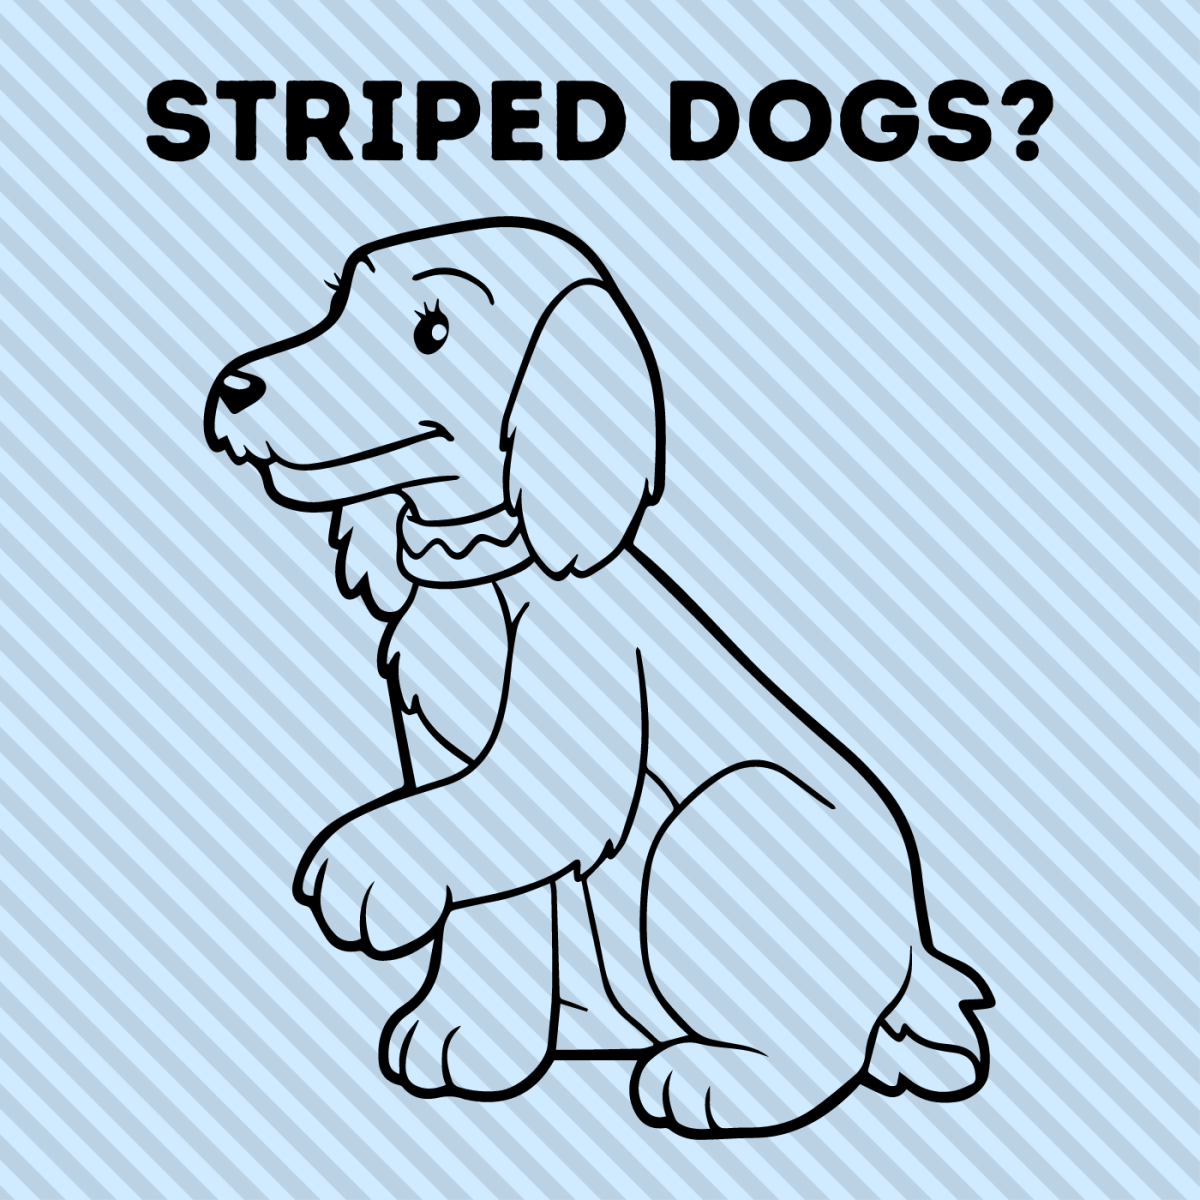 Striped Dogs